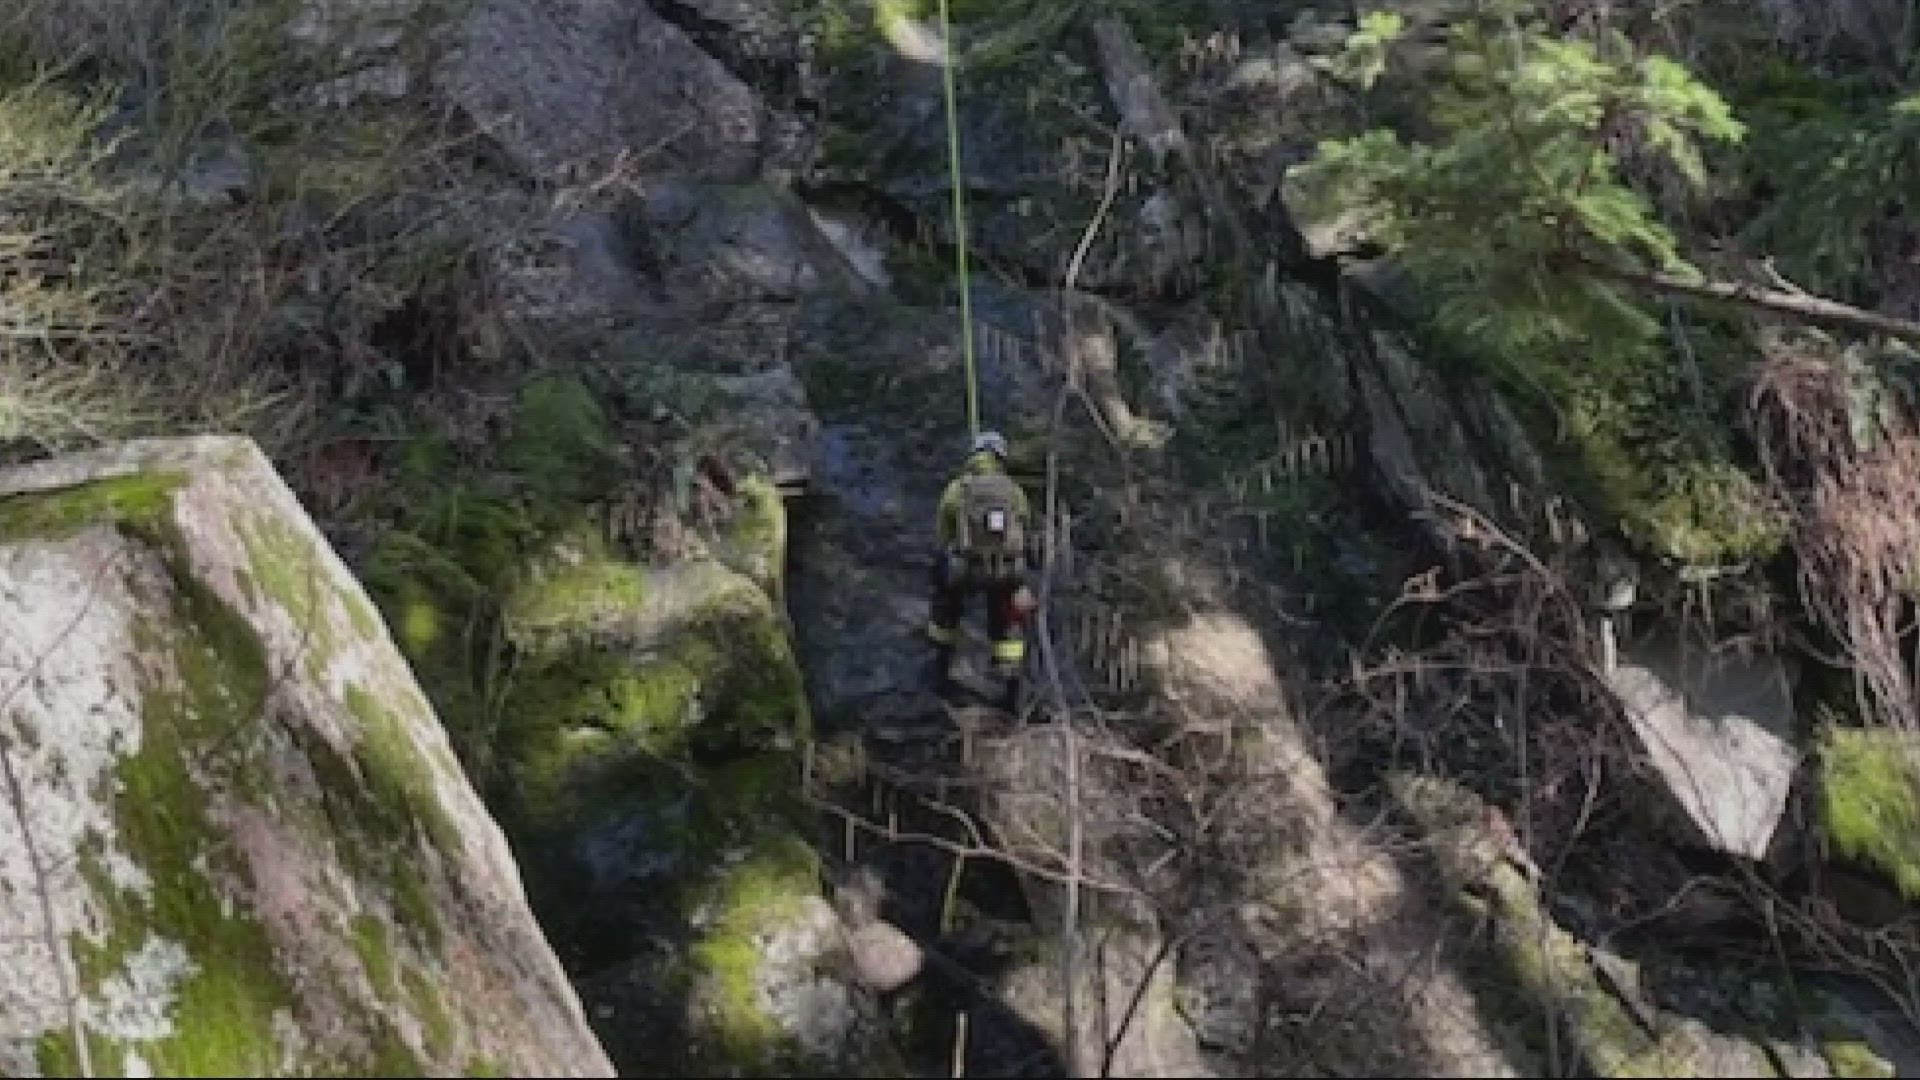 Vancouver firefighters rescued a rock climber on Thursday, who had fallen 25 feet while climbing Beacon Rock in Southwest Washington.